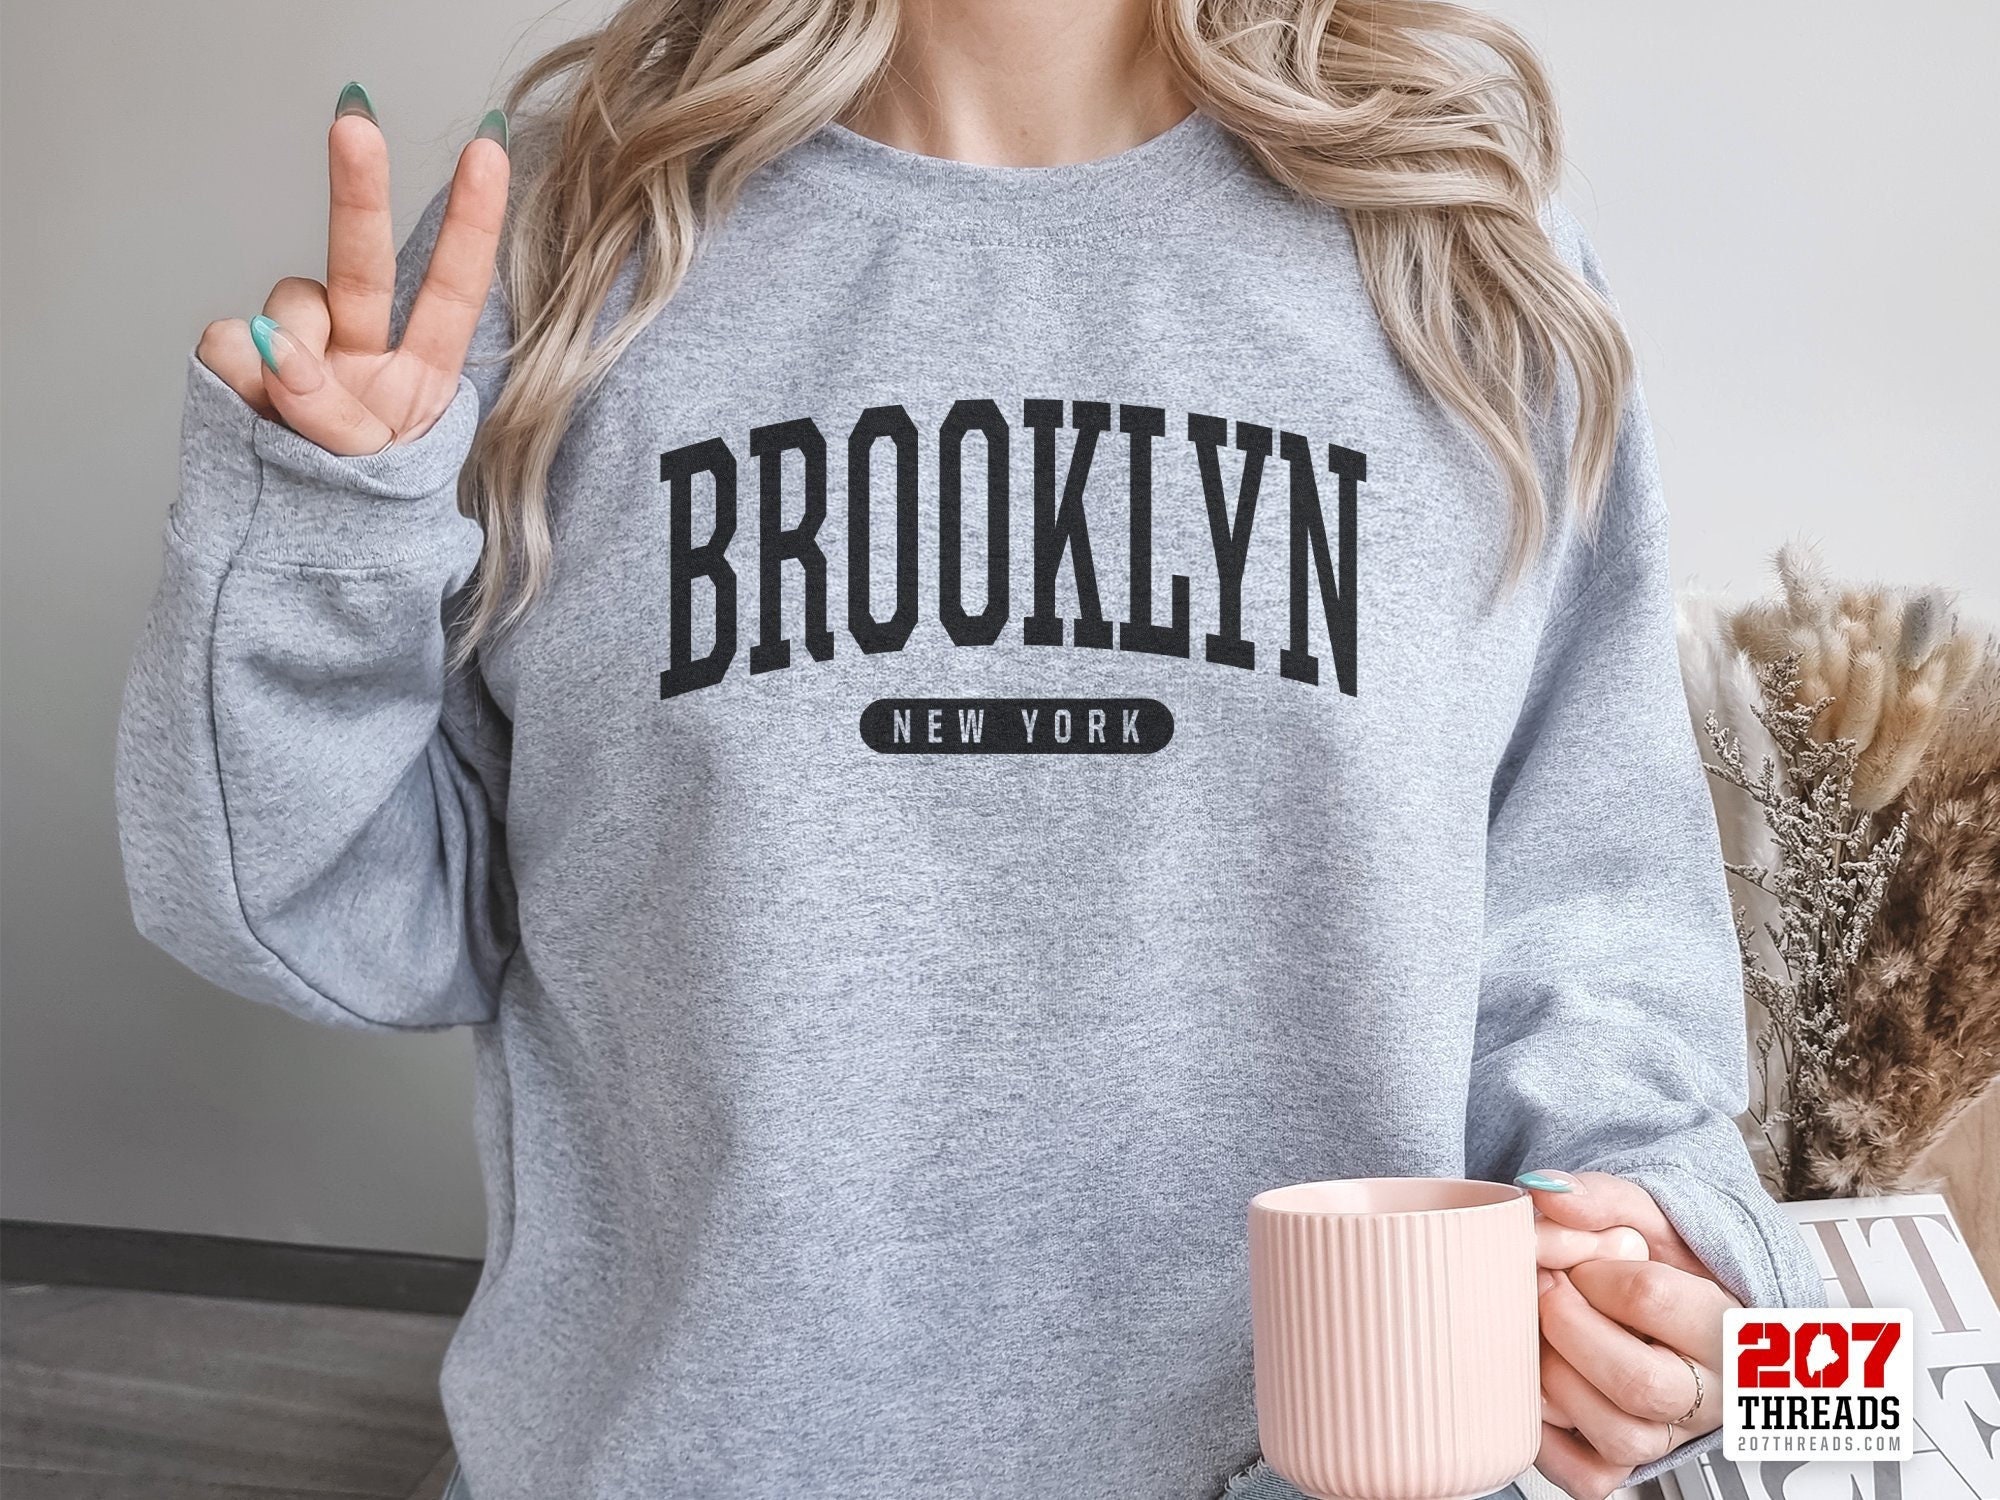 Brandy Melville New York Hoodie Blue - $45 (10% Off Retail) - From summer